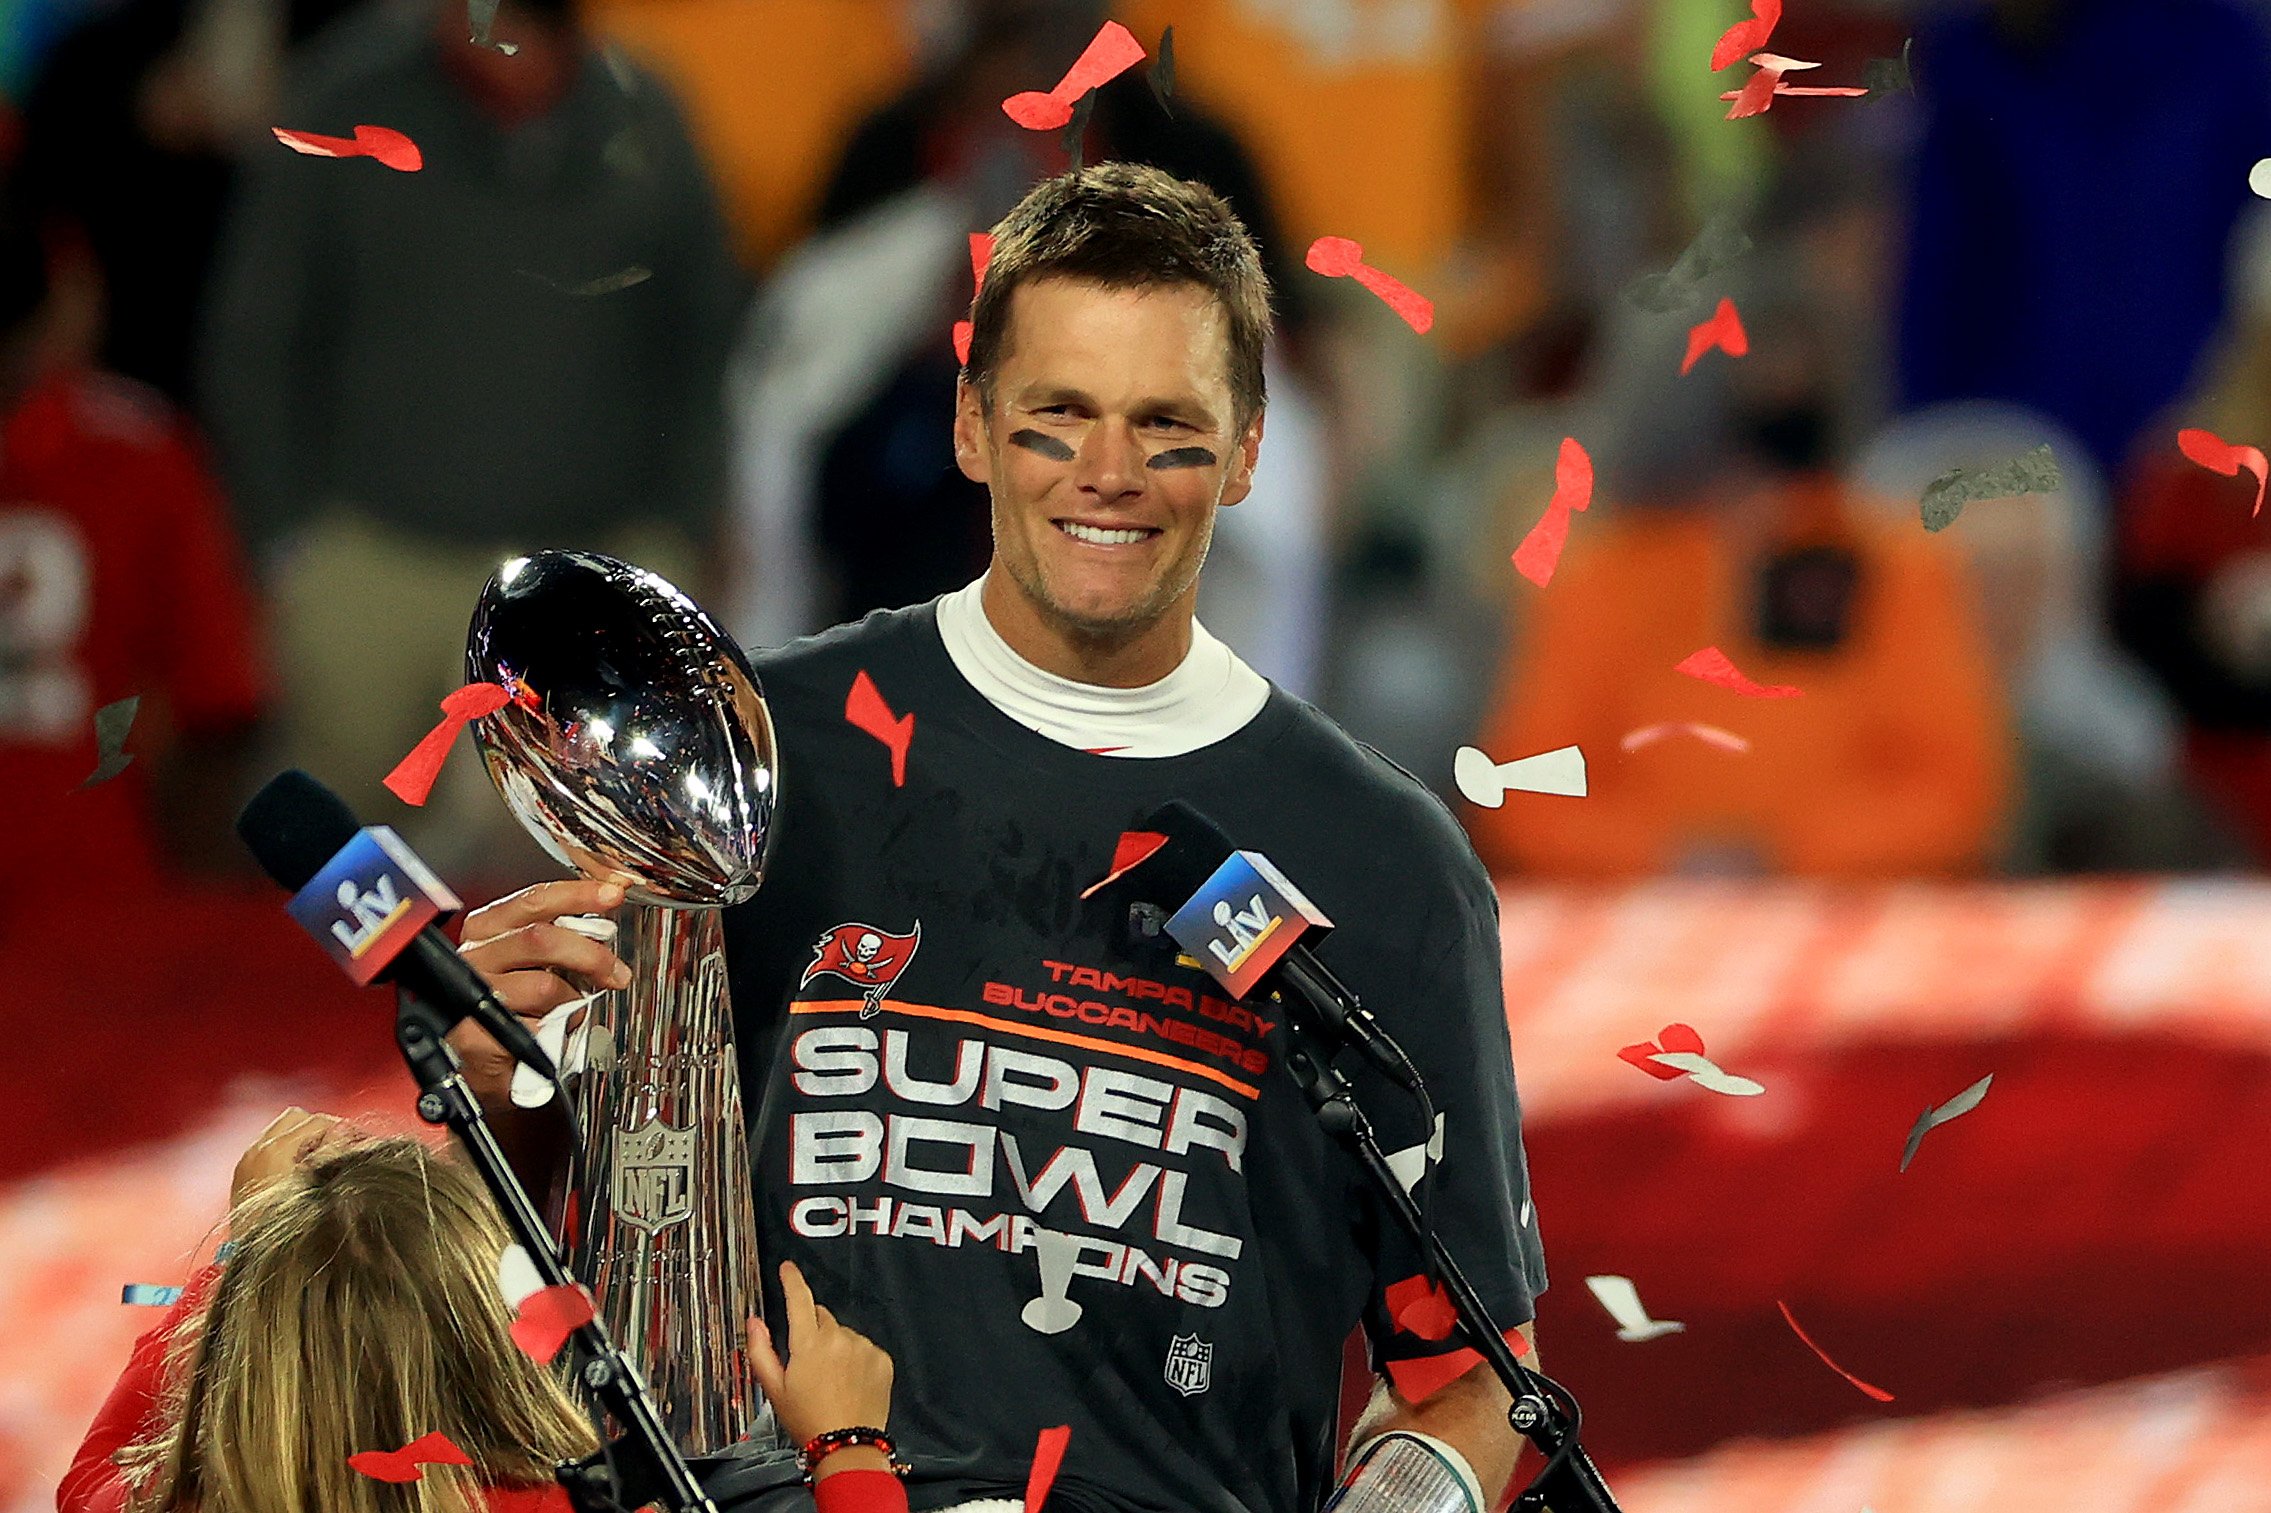 Tom Brady hoists the Vince Lombardi Trophy after winning Super Bowl LV at Raymond James Stadium on February 07, 2021 in Tampa, Florida | Photo: Getty Images